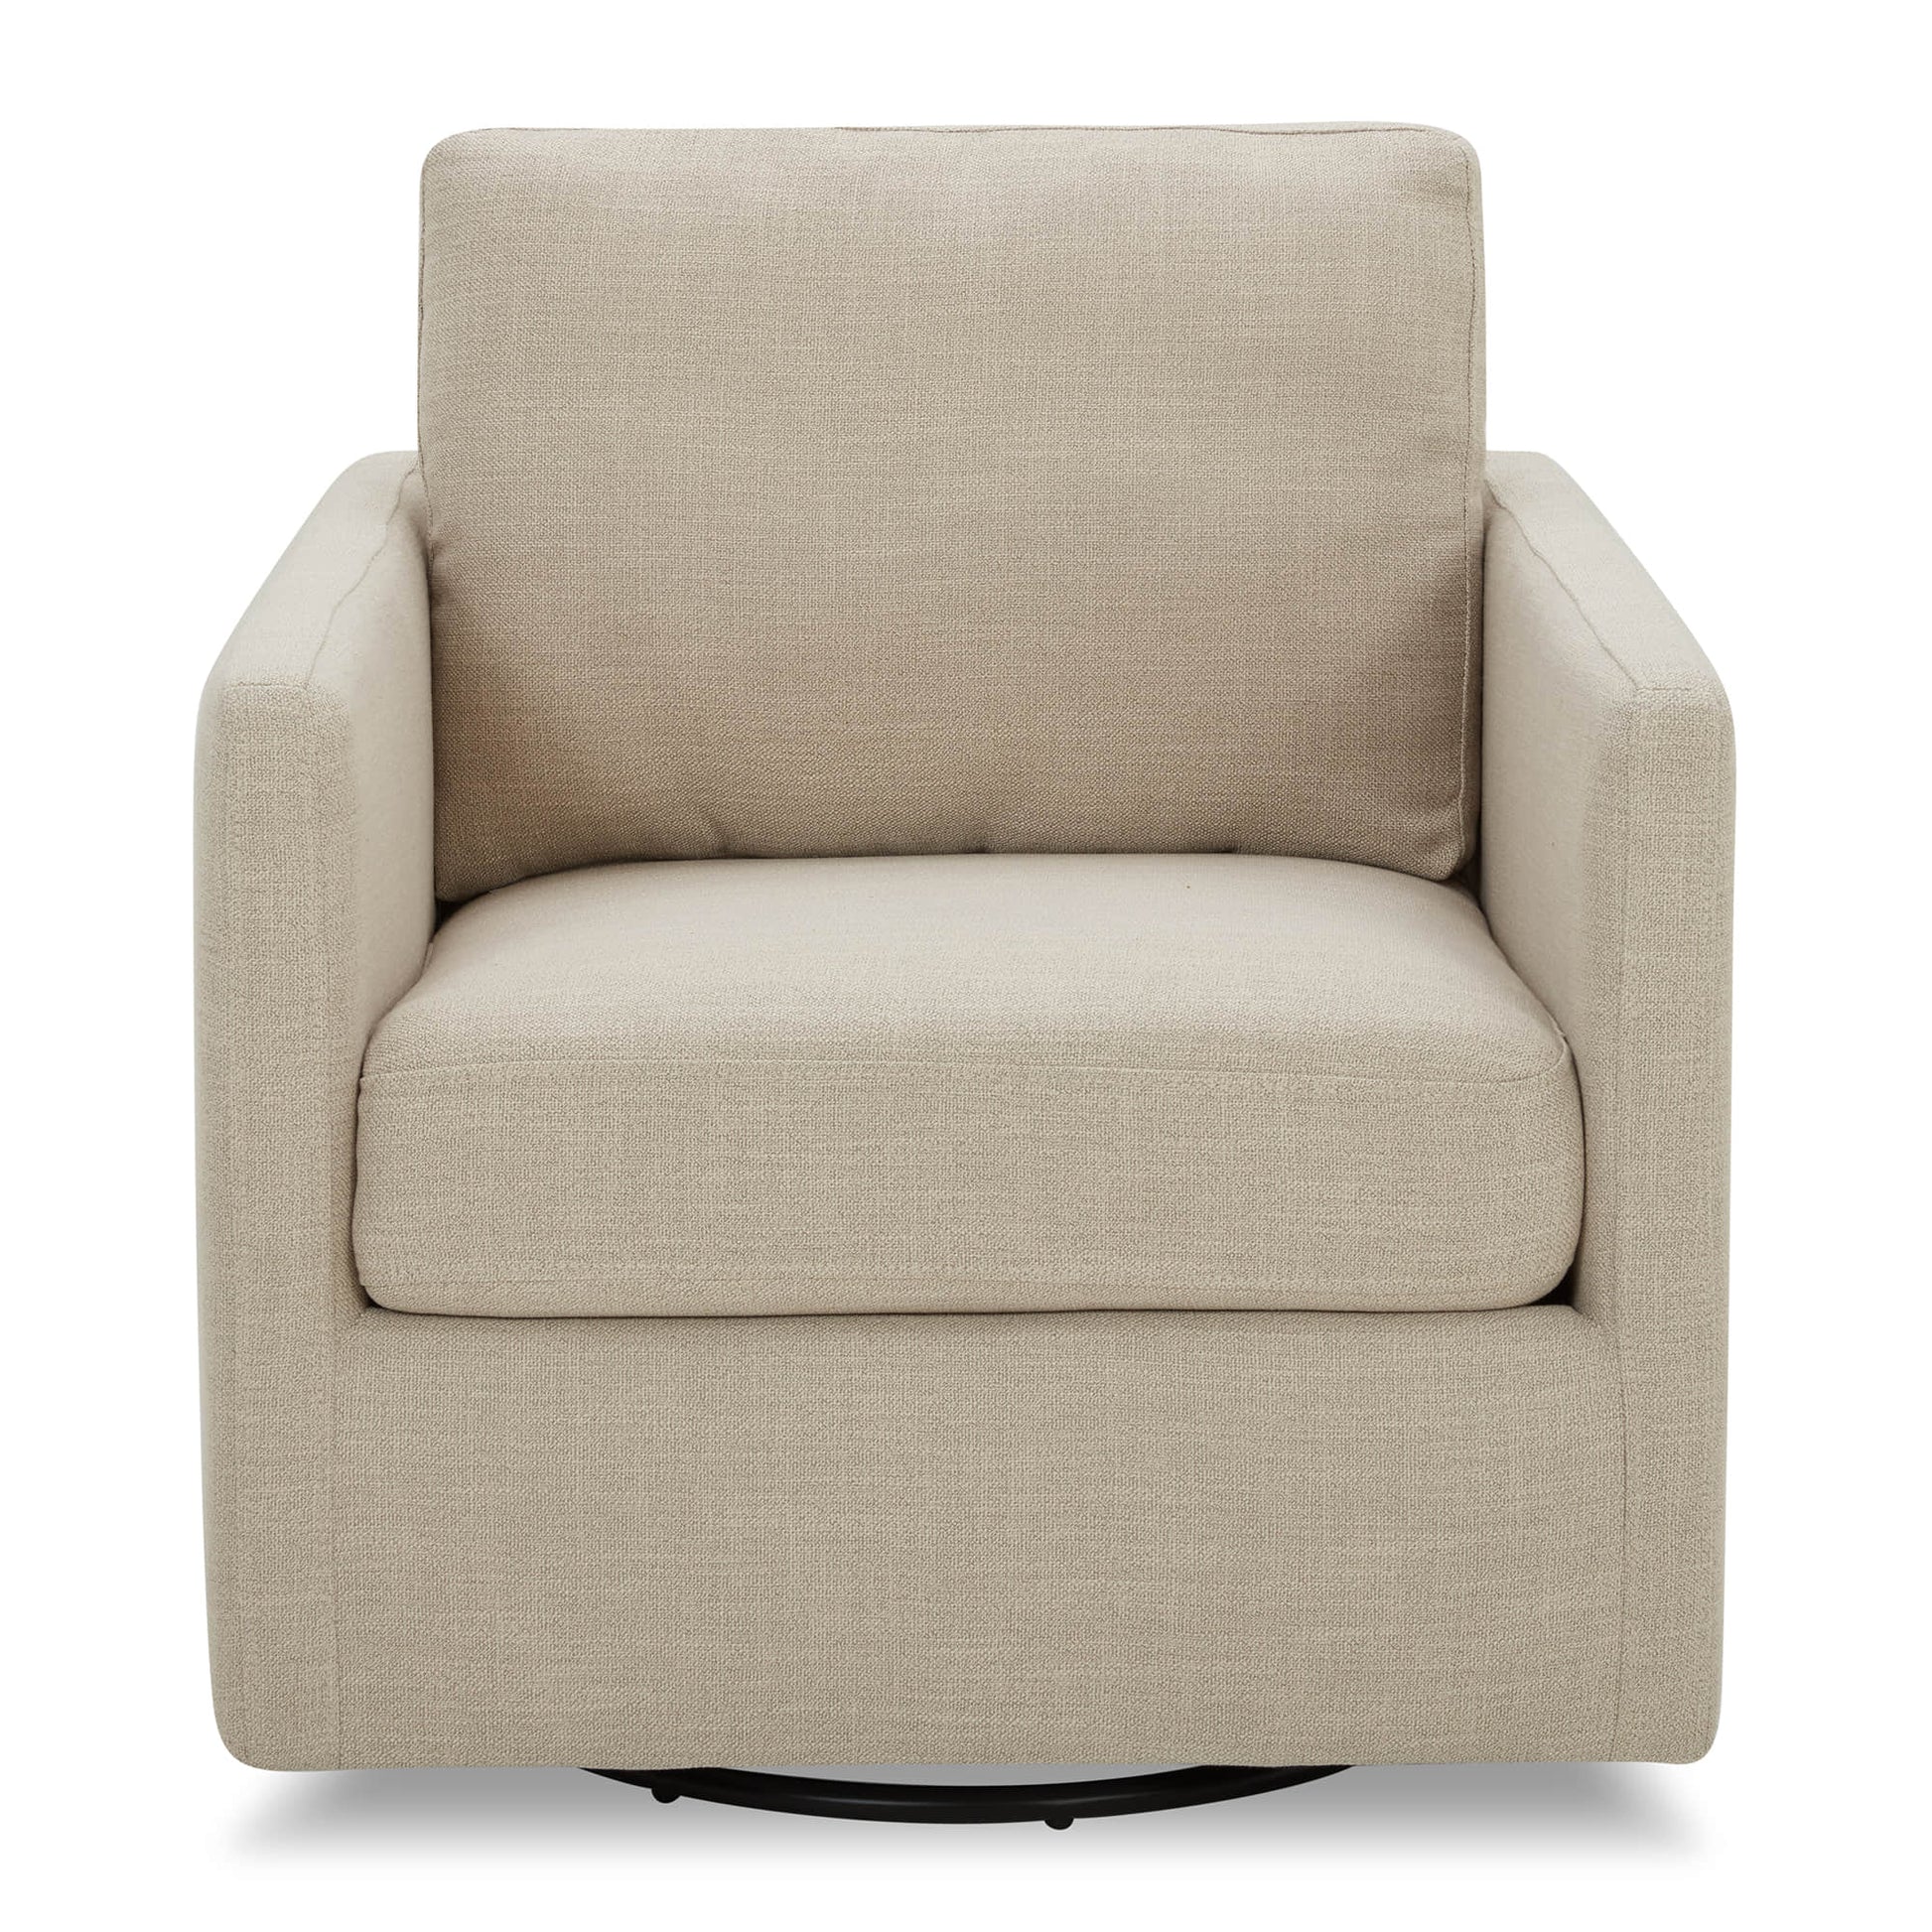 CHITA LIVING-Emma Contemporary Swivel Armchair Accent Chair-Accent Chair-Fabric-Flax Beige-